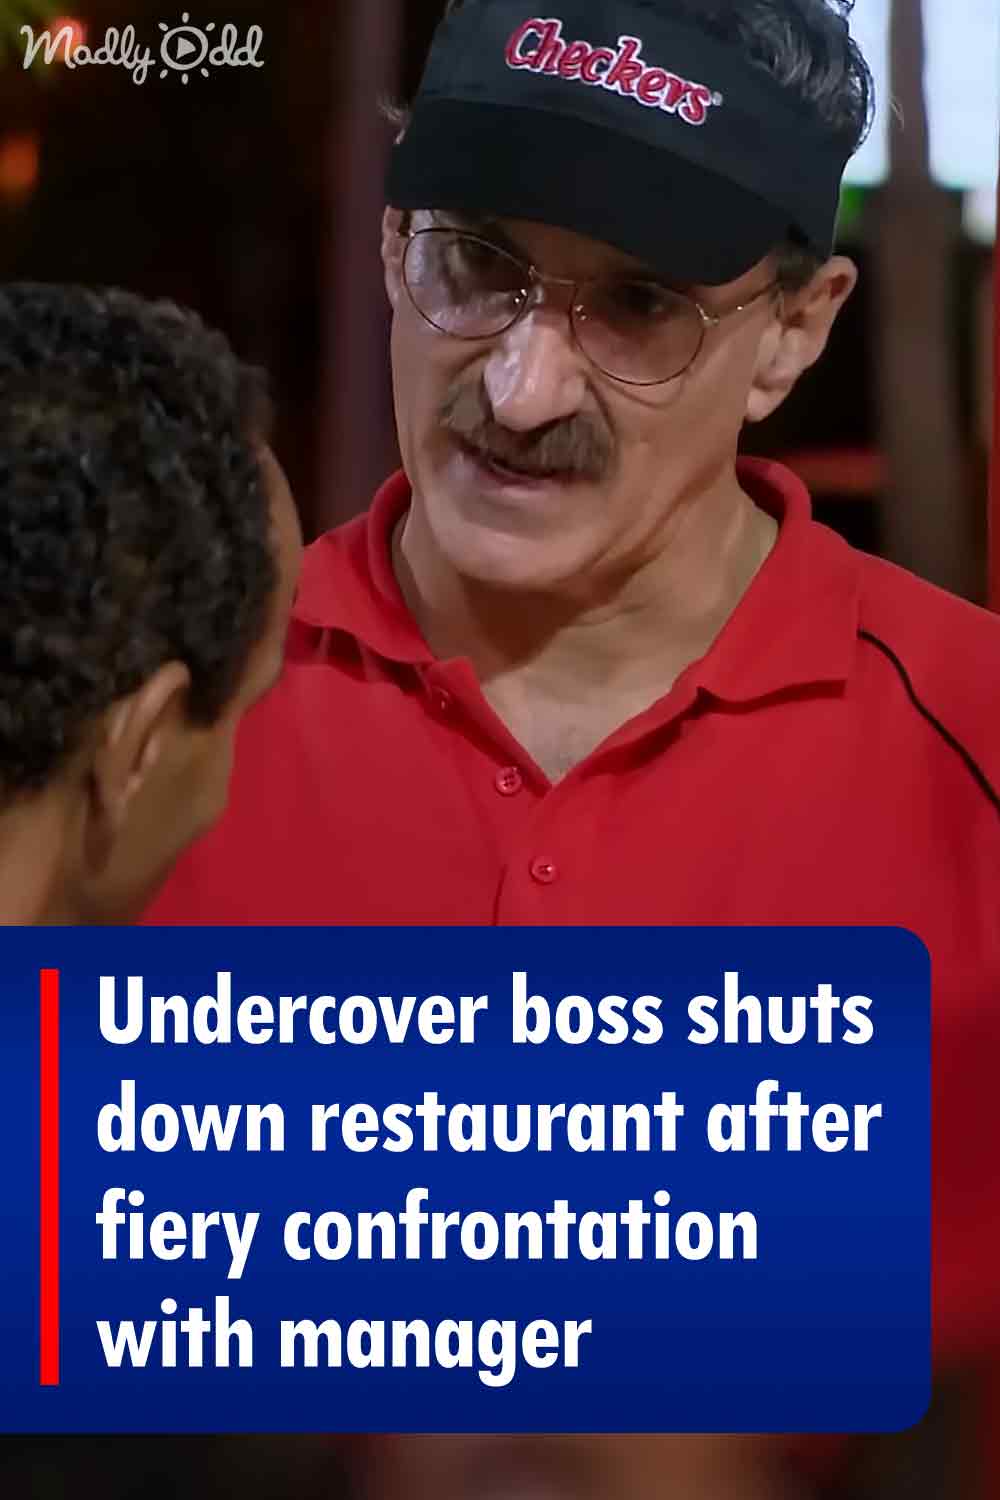 Undercover boss shuts down restaurant after fiery confrontation with manager